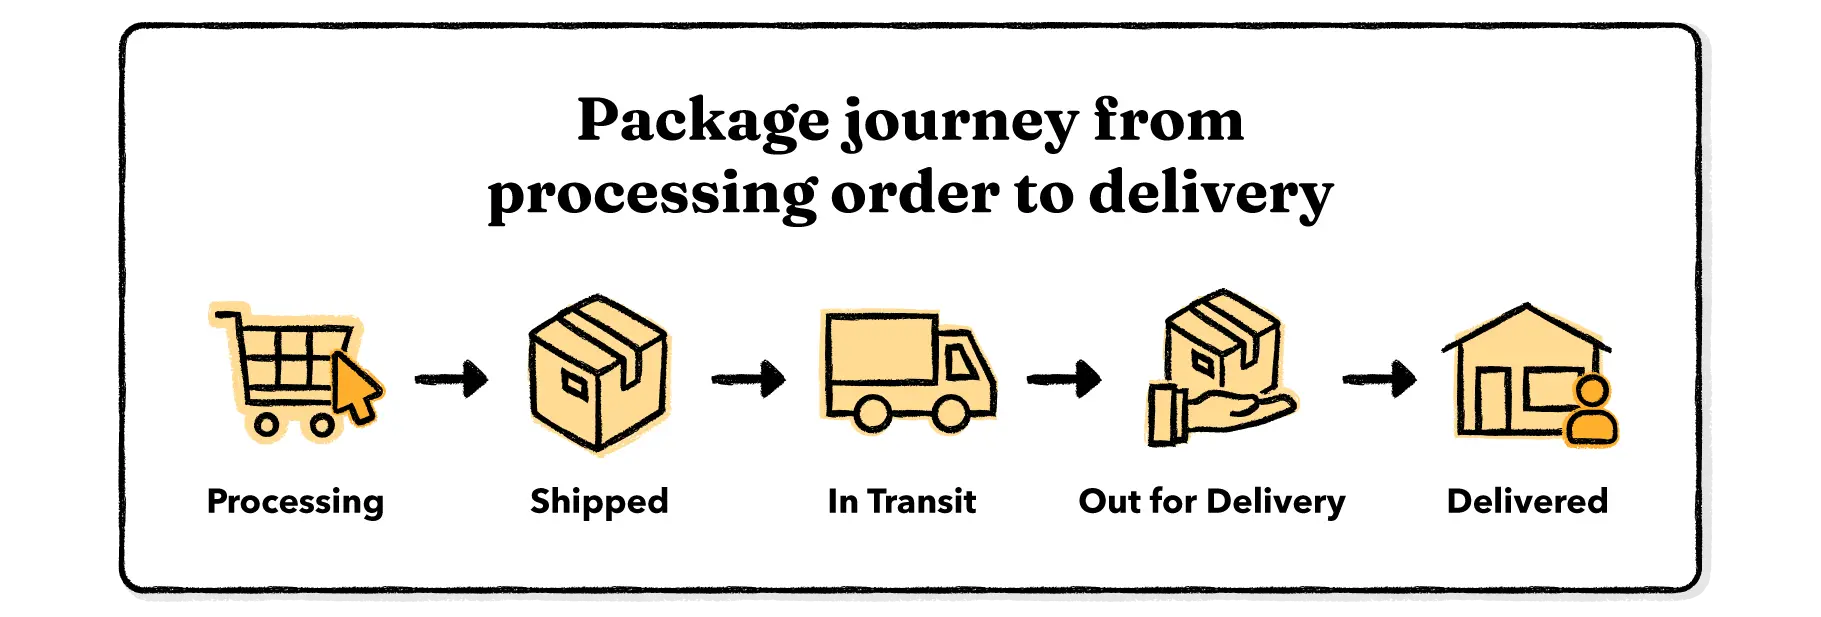 package journey from processing order to delivery